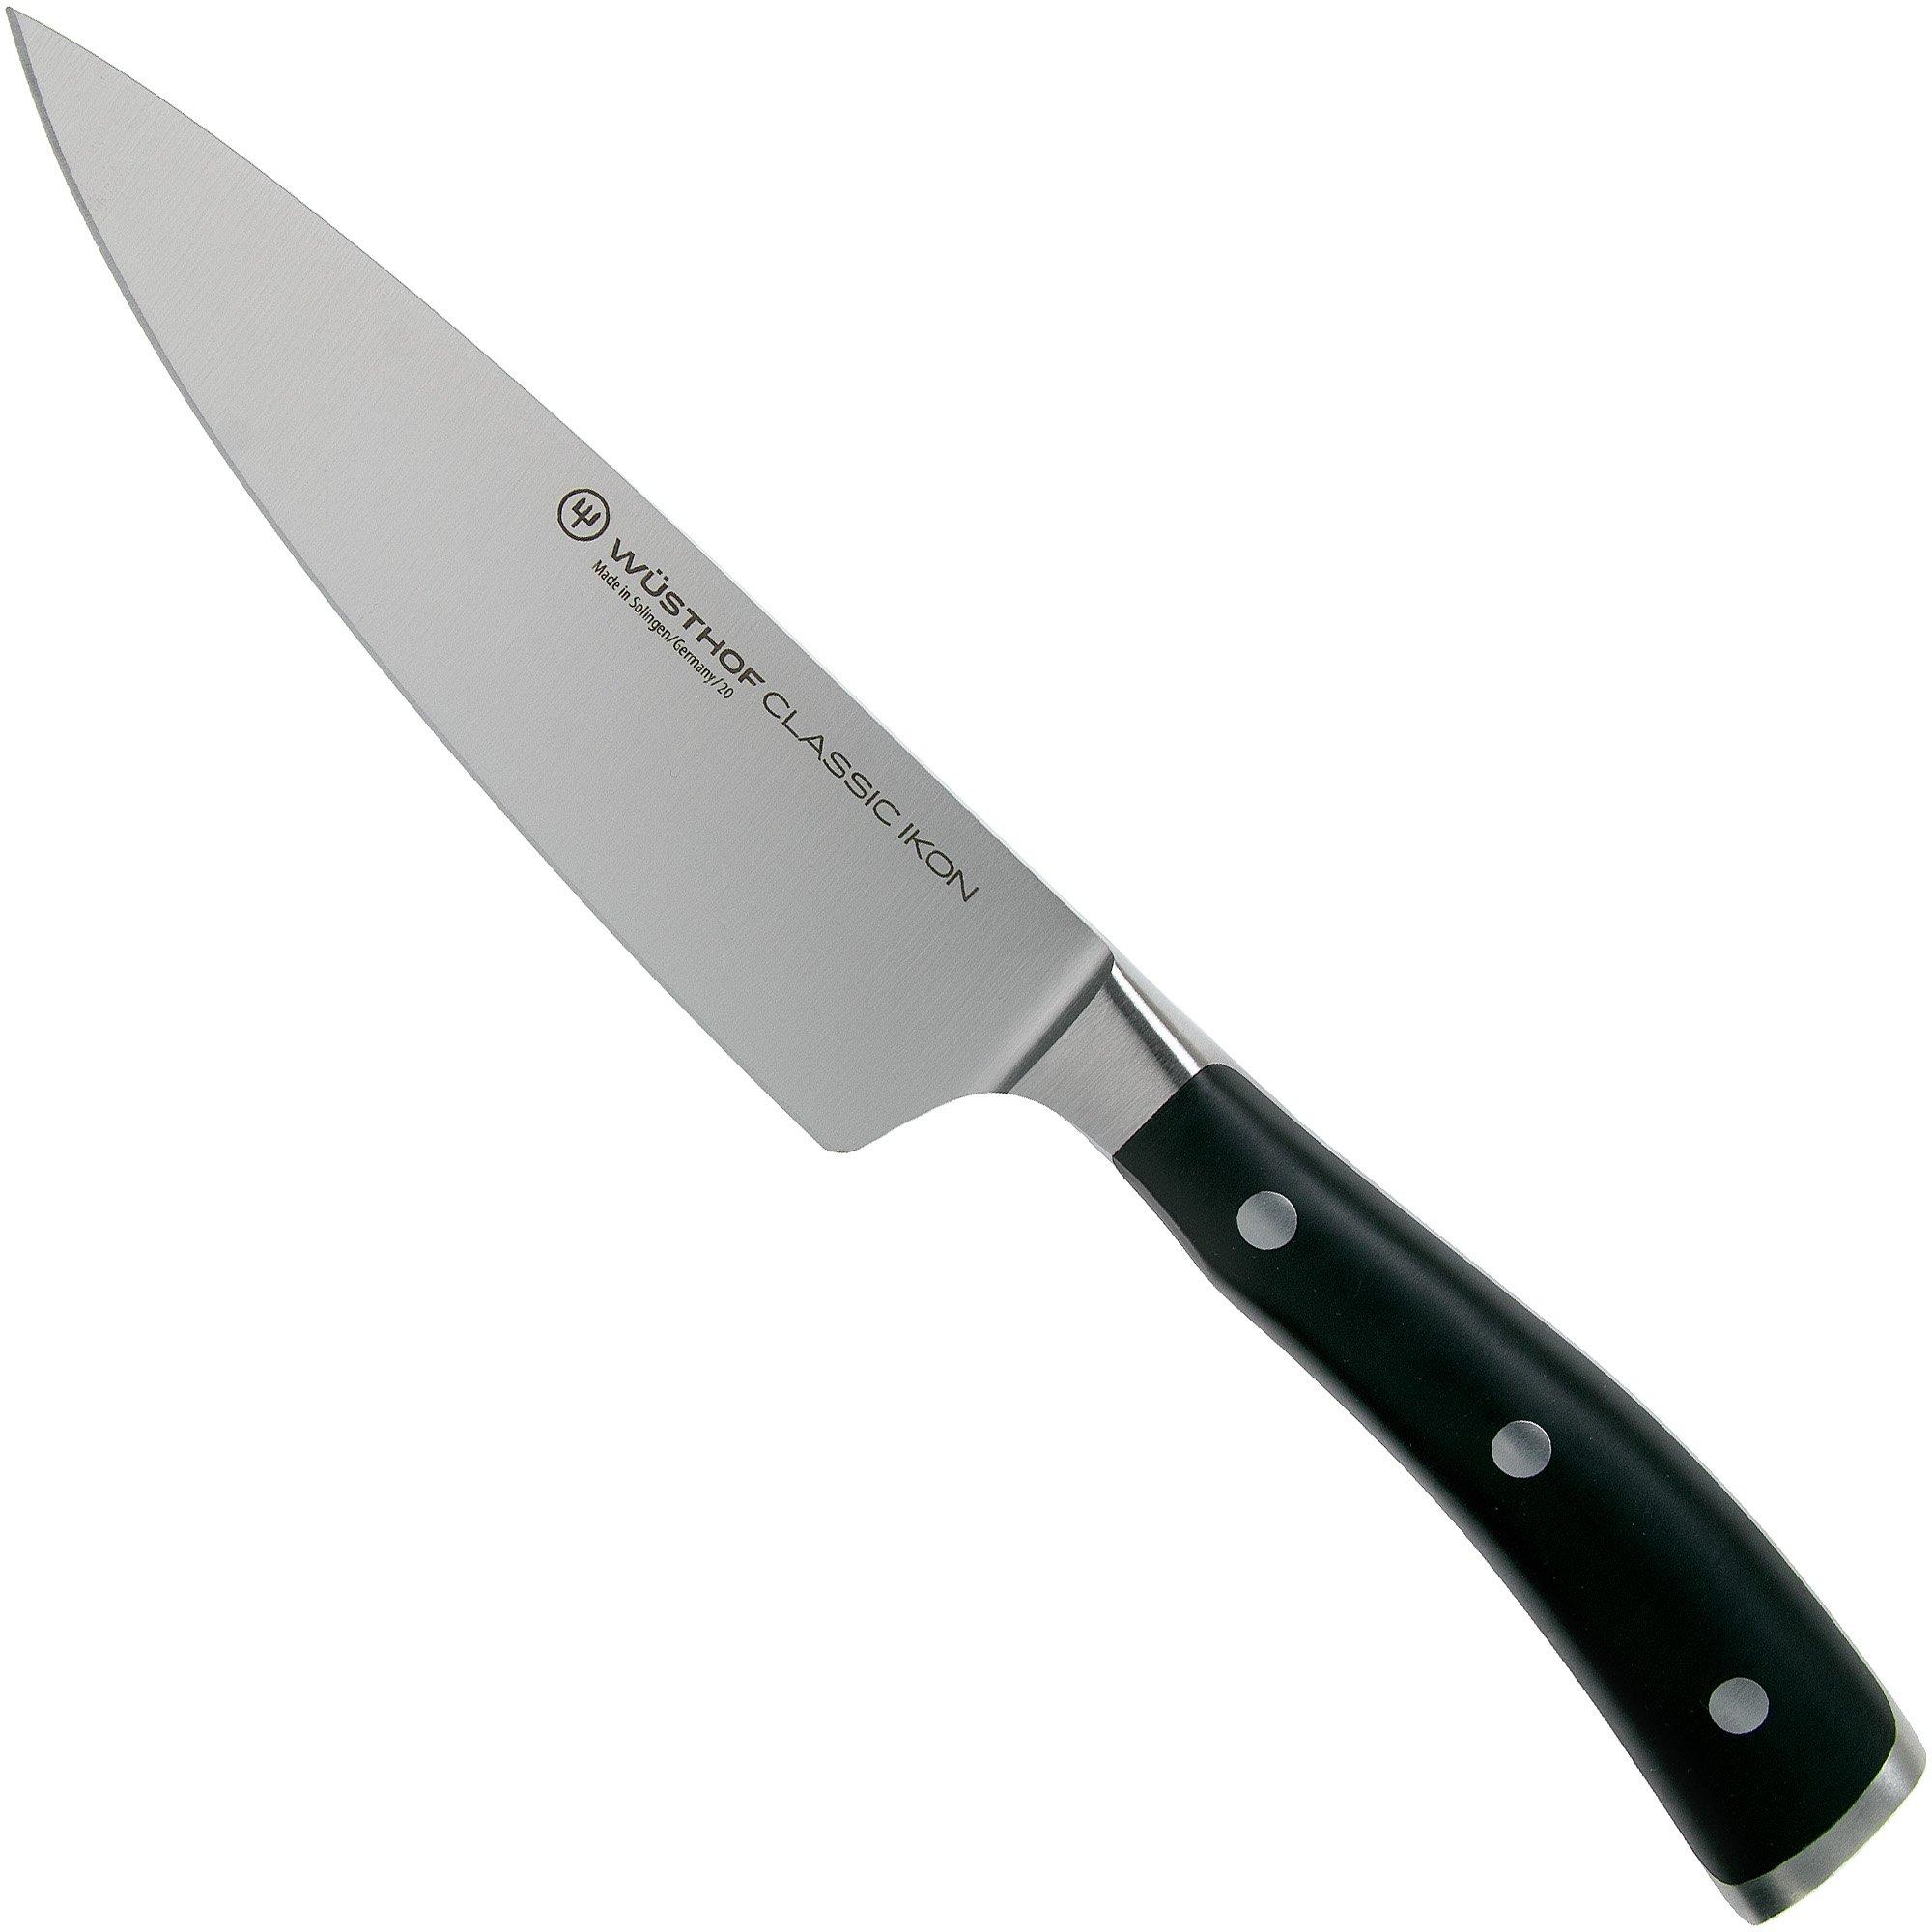 Wusthof Germany - Classic - Carving knife - 4520/20 - Knife